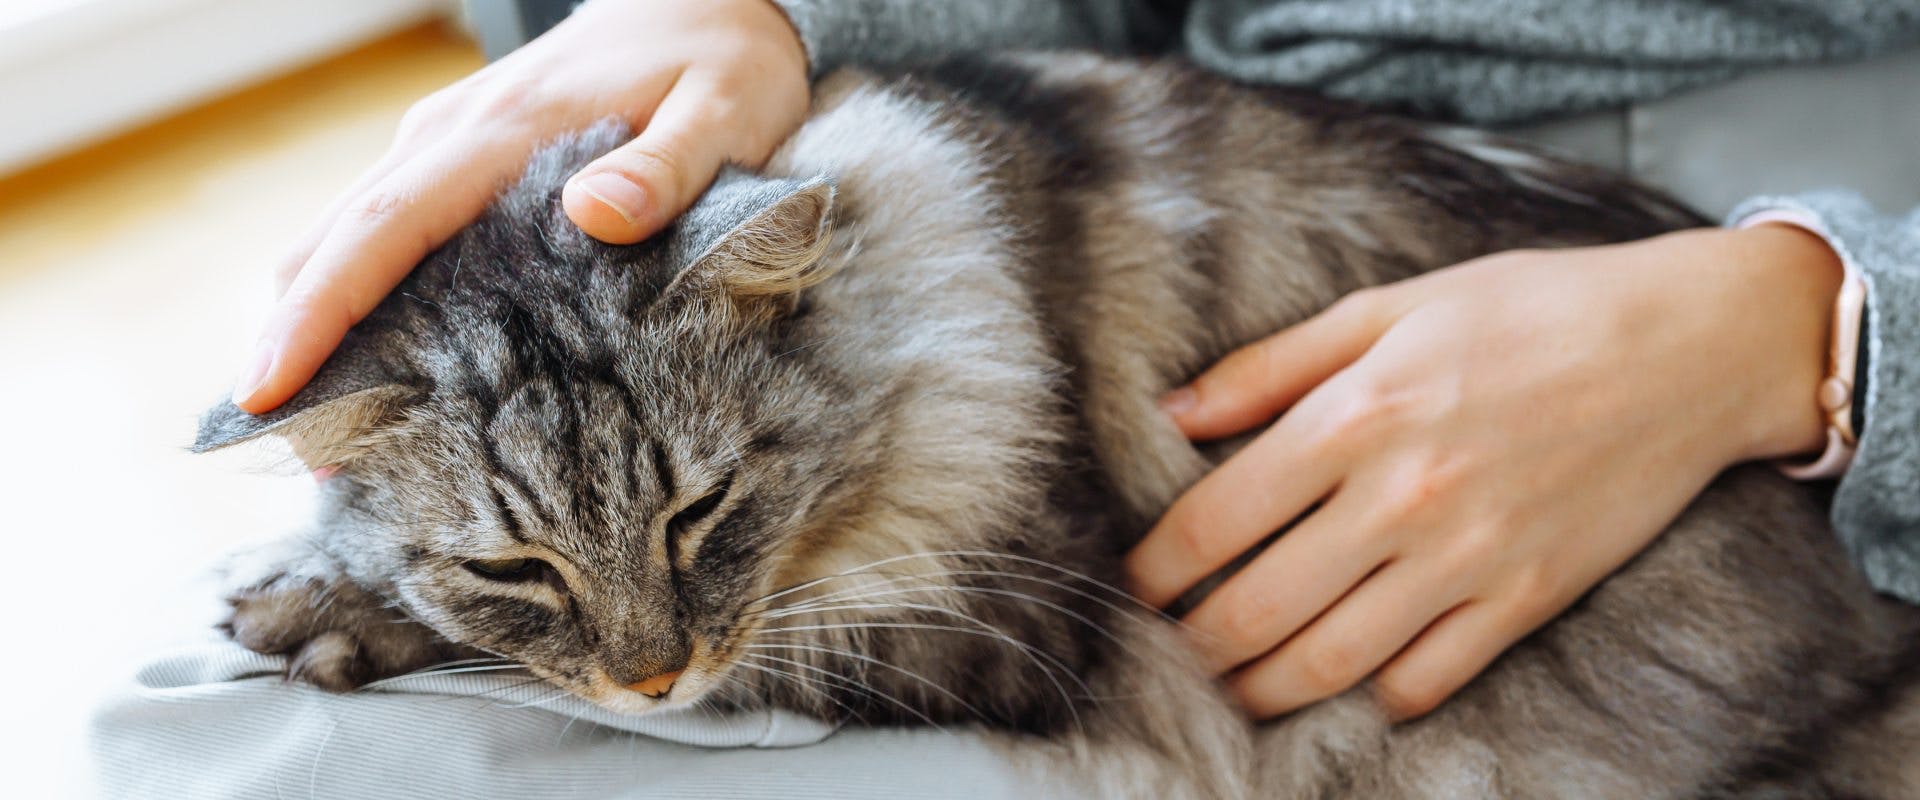 A grey long haired cat having breathing problems and being comforted.